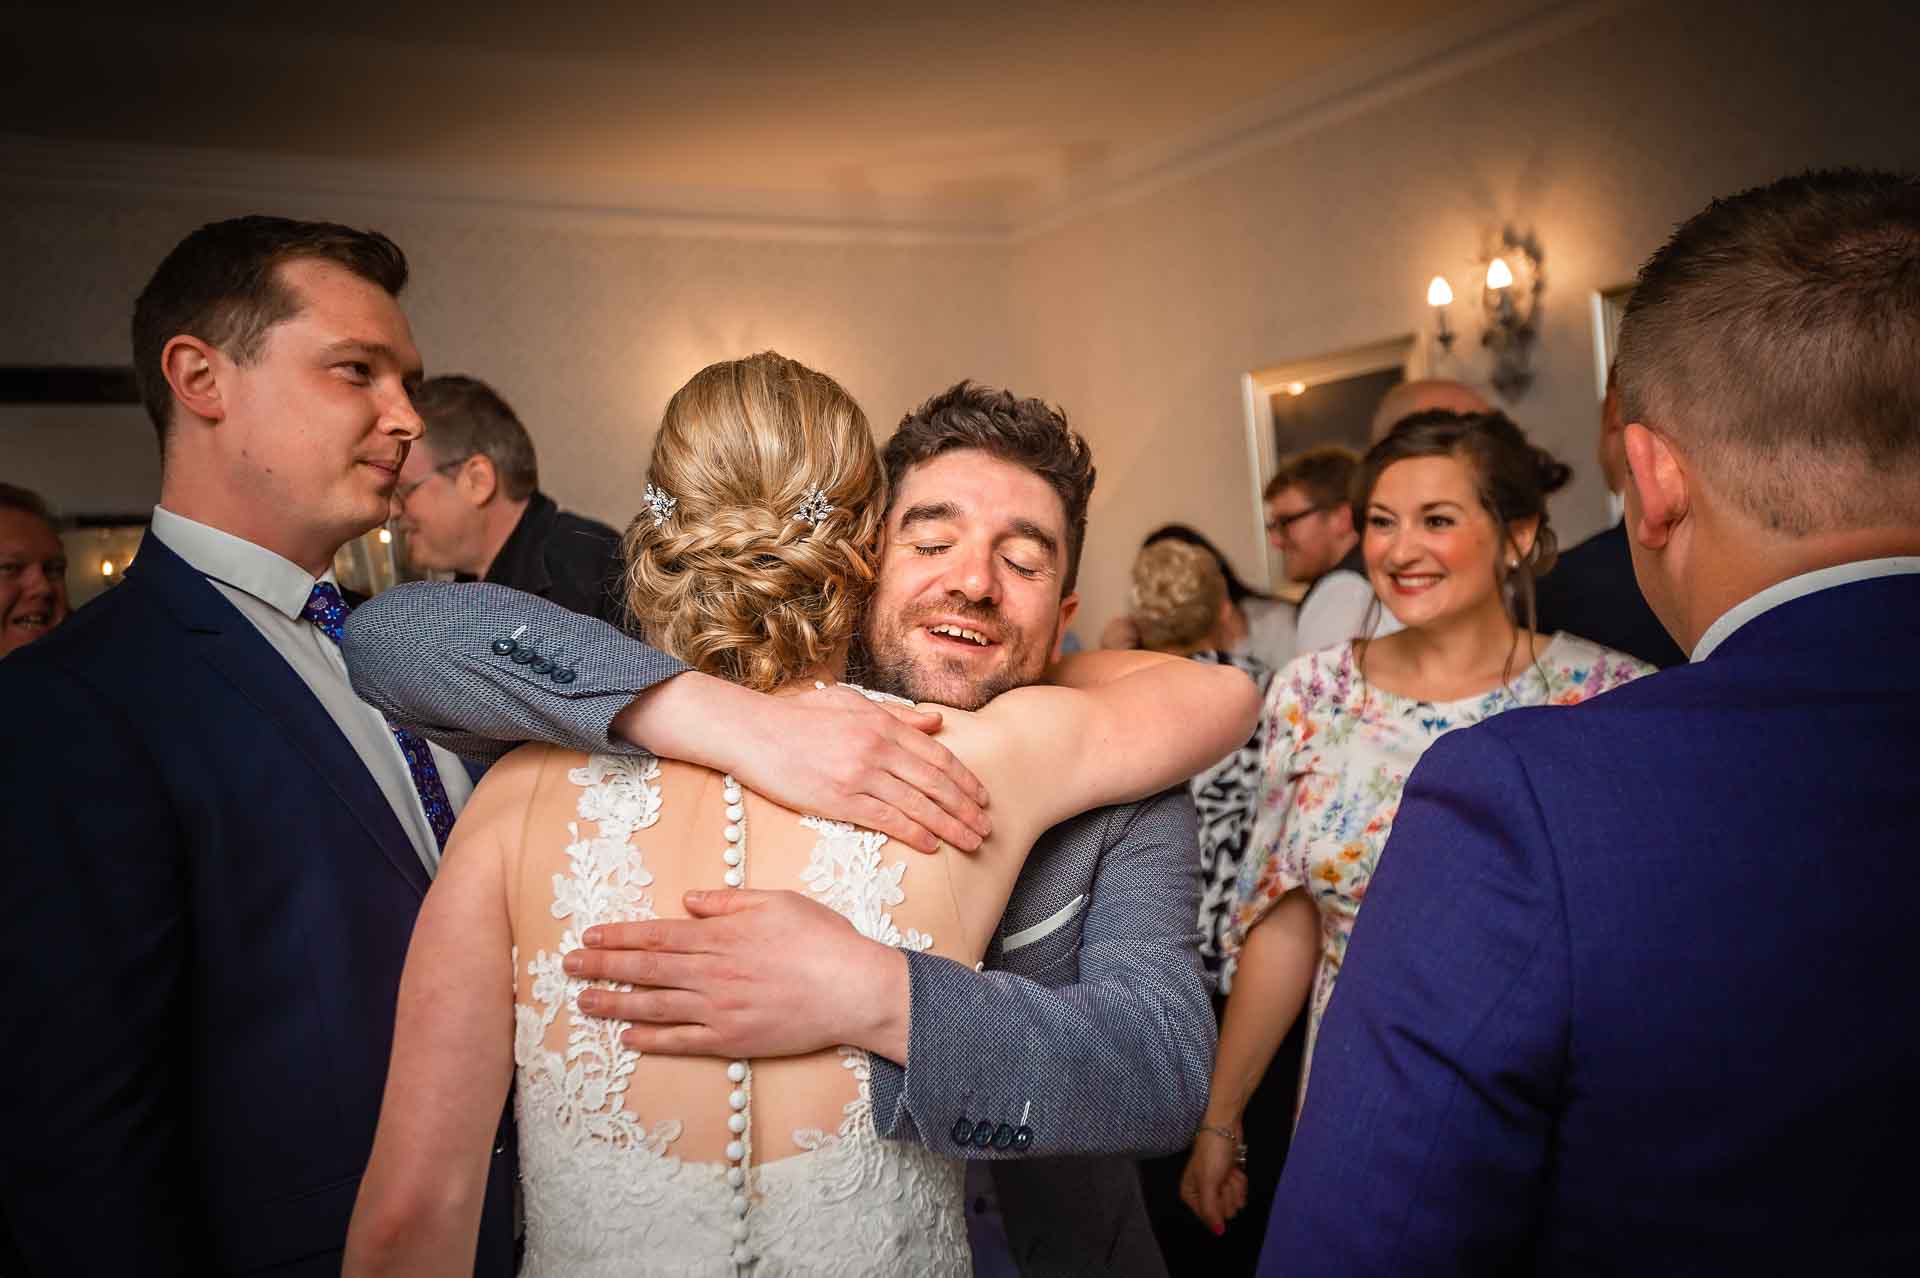 Male guest hugging bride with eyes shut at wedding